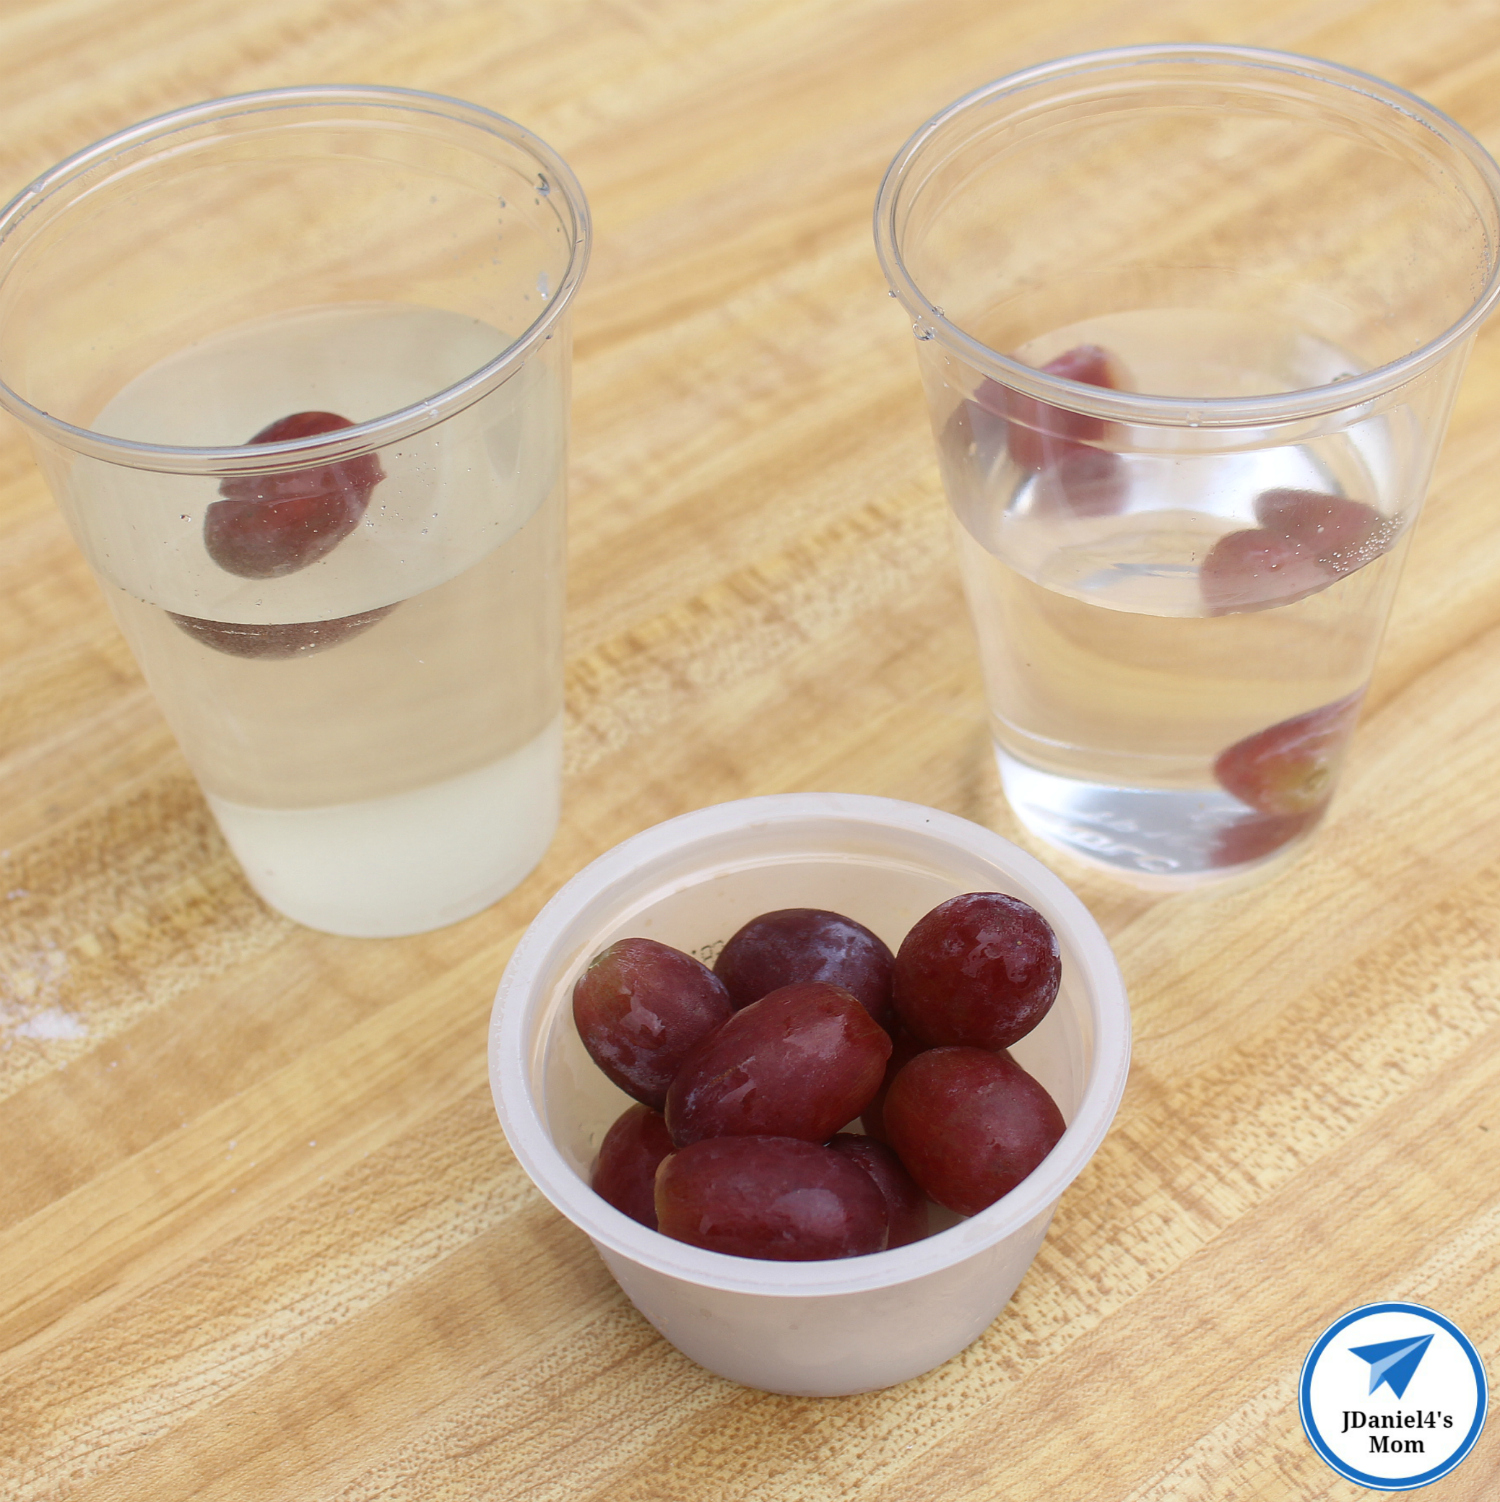 Do Grapes Sink or Float Sugar Water Density Experiment - One Floating Grape